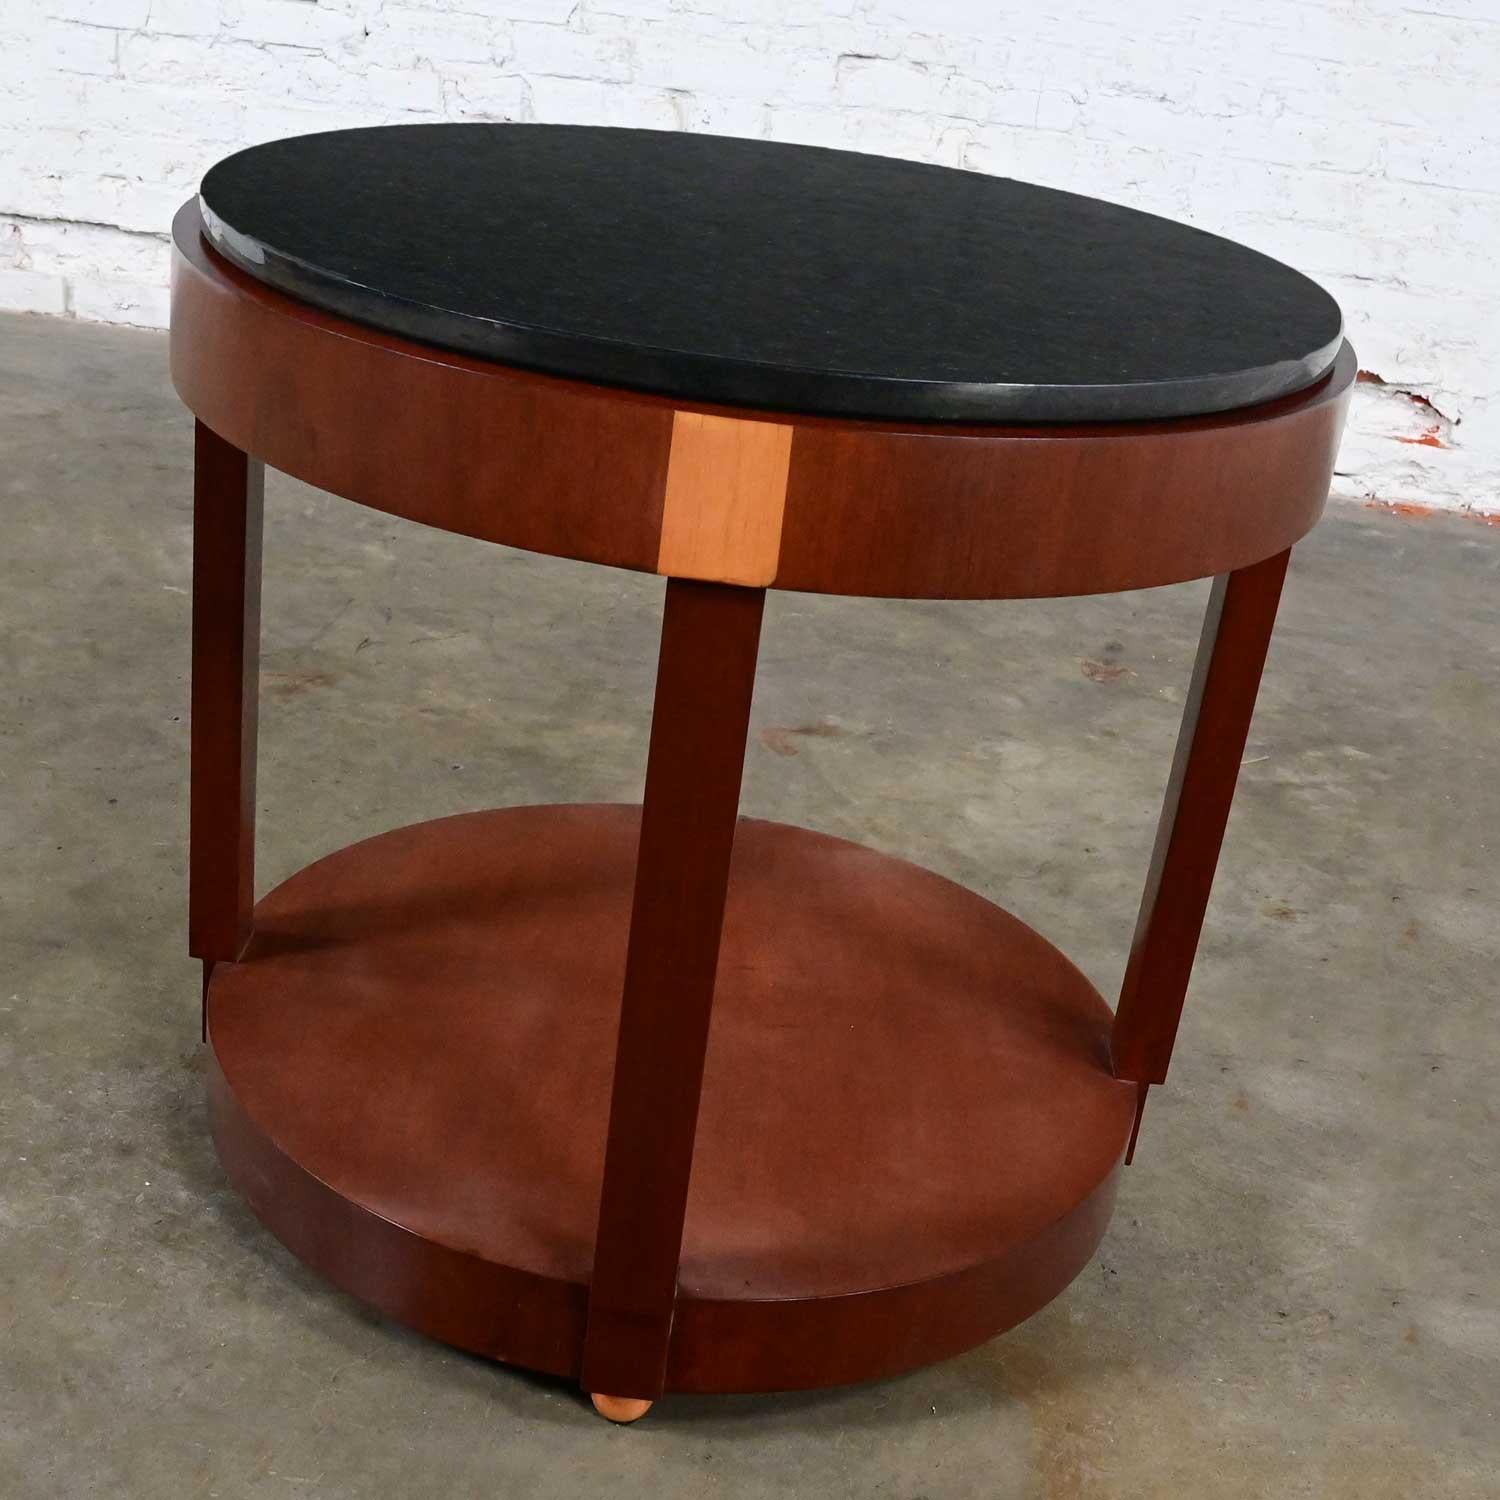 Stunning vintage Art Deco Revival custom two-toned mahogany round side or accent table with a black granite top custom made by Rialto & designed by Zlata Pericic for Meca Design & Production. Beautiful condition, keeping in mind that this is vintage